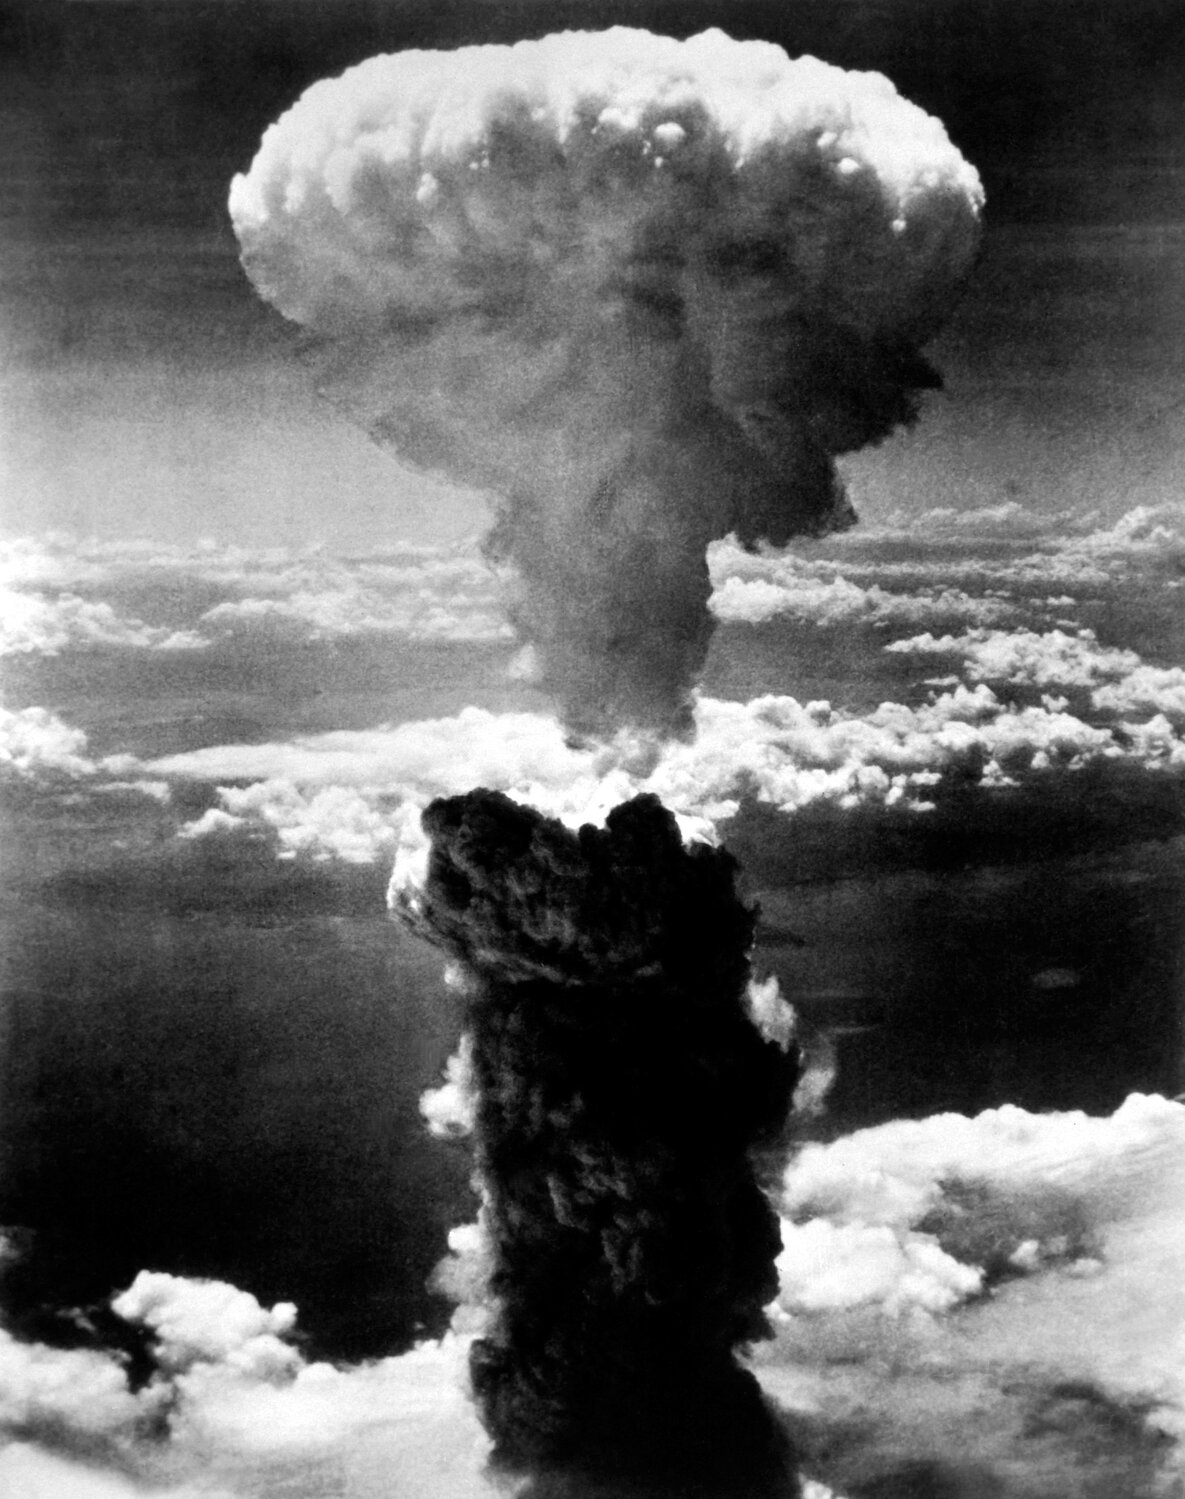 "Public Domain: WWII: Atom Bomb, Nagasaki, August 1945 (HD-SN-99-02901 DOD/NARA)" by pingnews.com is marked with Public Domain Mark 1.0.